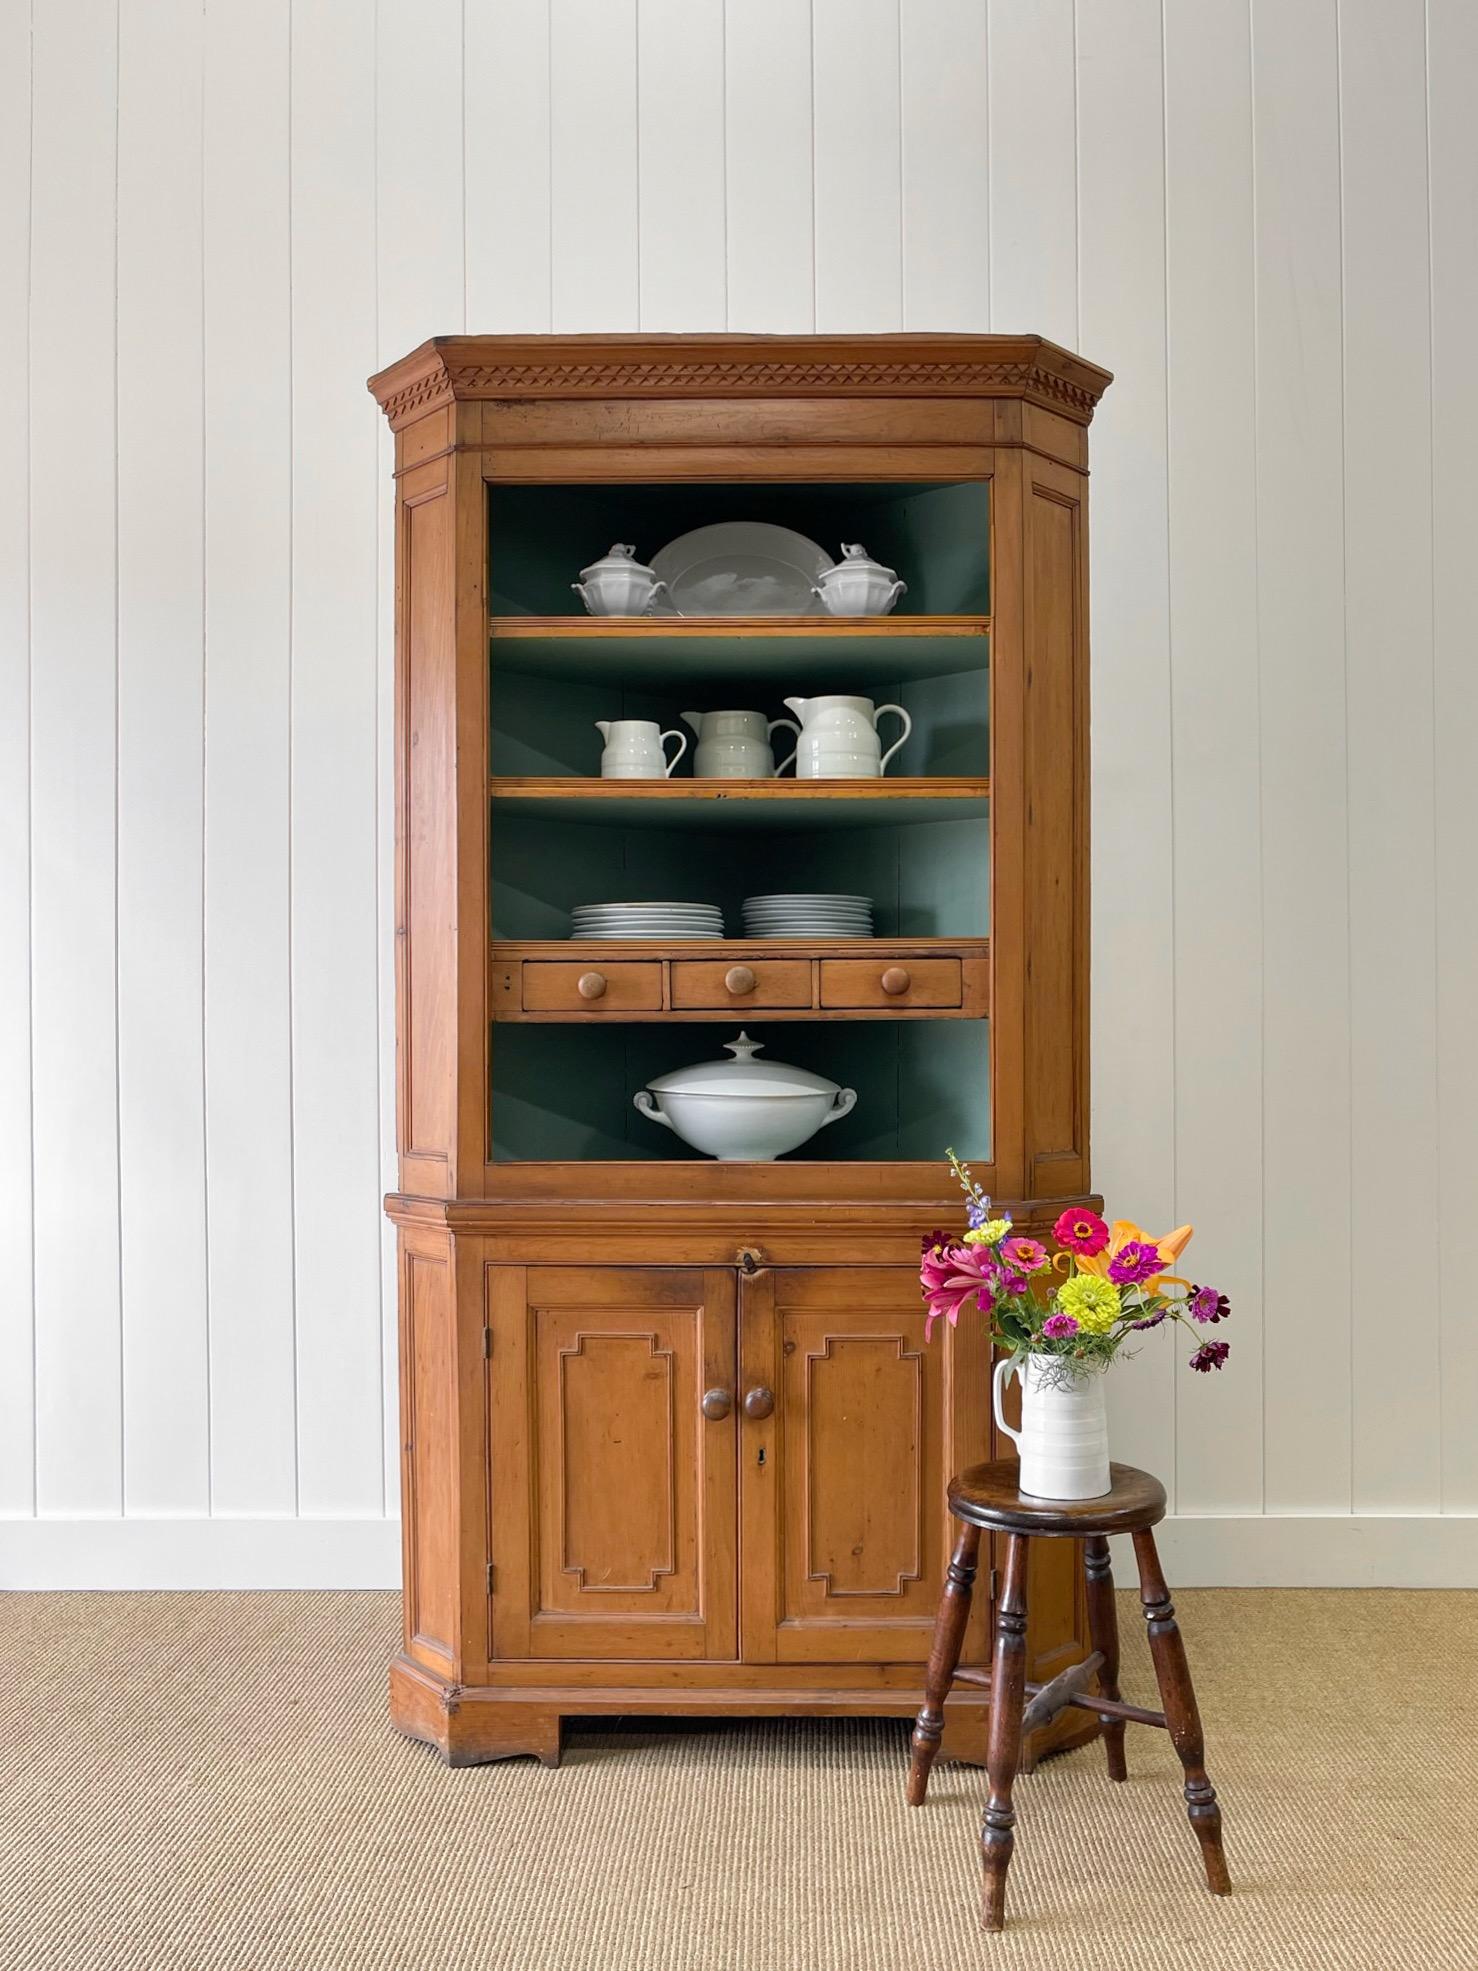 A charming English 19th century pine cupboard. The lowest shelf has three small drawers for useful storage. Two doors open to reveal shelves for storage. Nice wooden knob hardware. Decorative paneled doors. All sits atop bracket feet. Natural honey